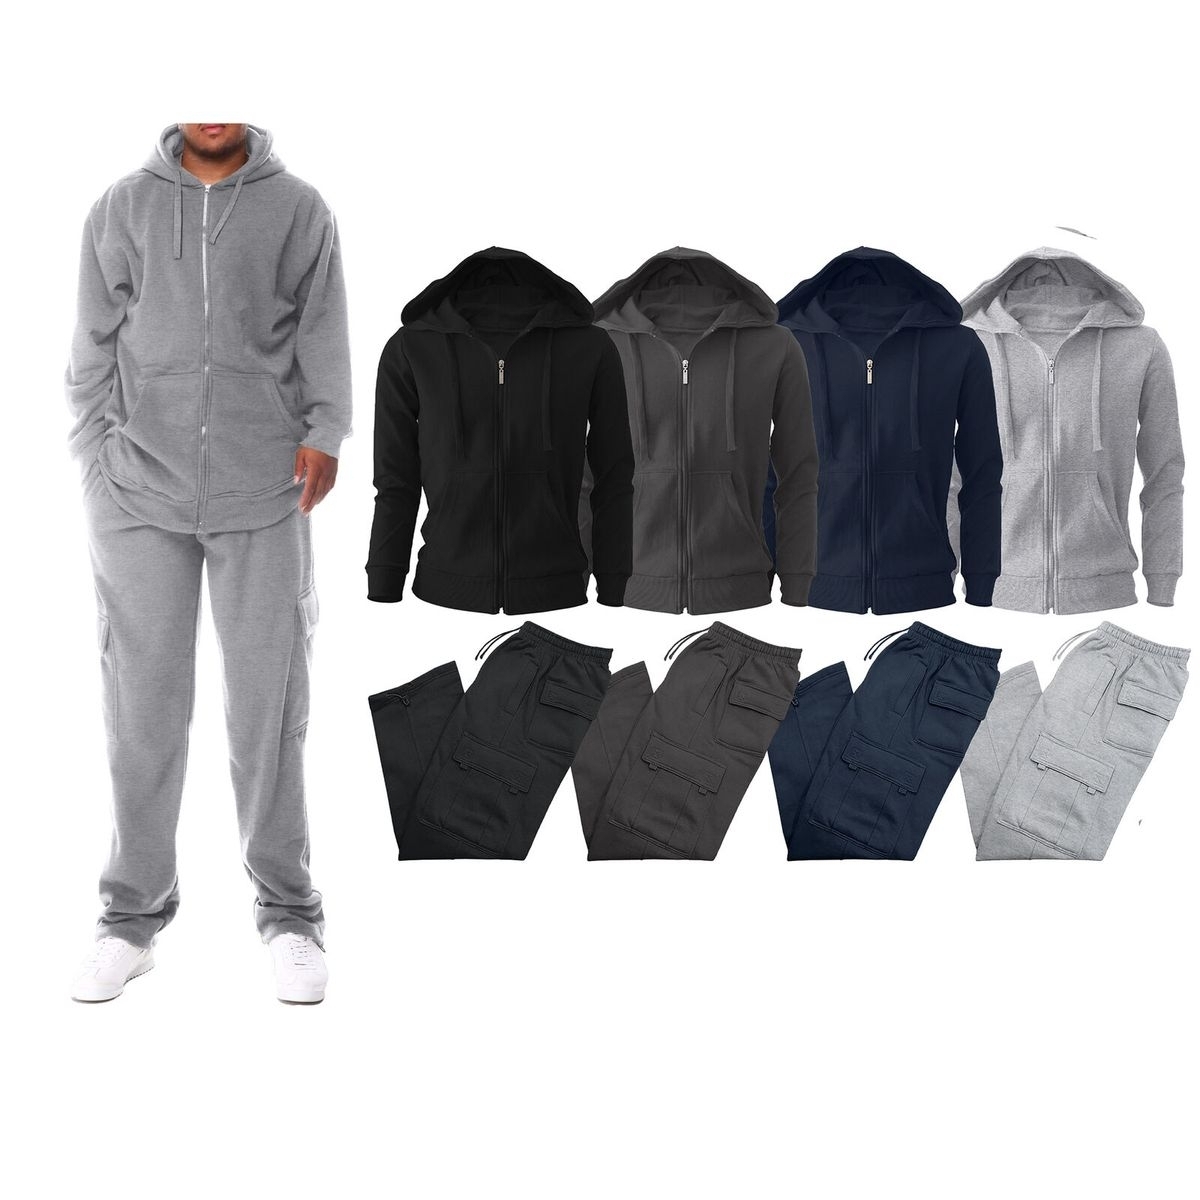 2-Pack: Men's Big & Tall Winter Warm Athletic Active Cozy Fleece Lined Multi-Pocket Full Zip Up Cargo Tracksuit - Navy, Large